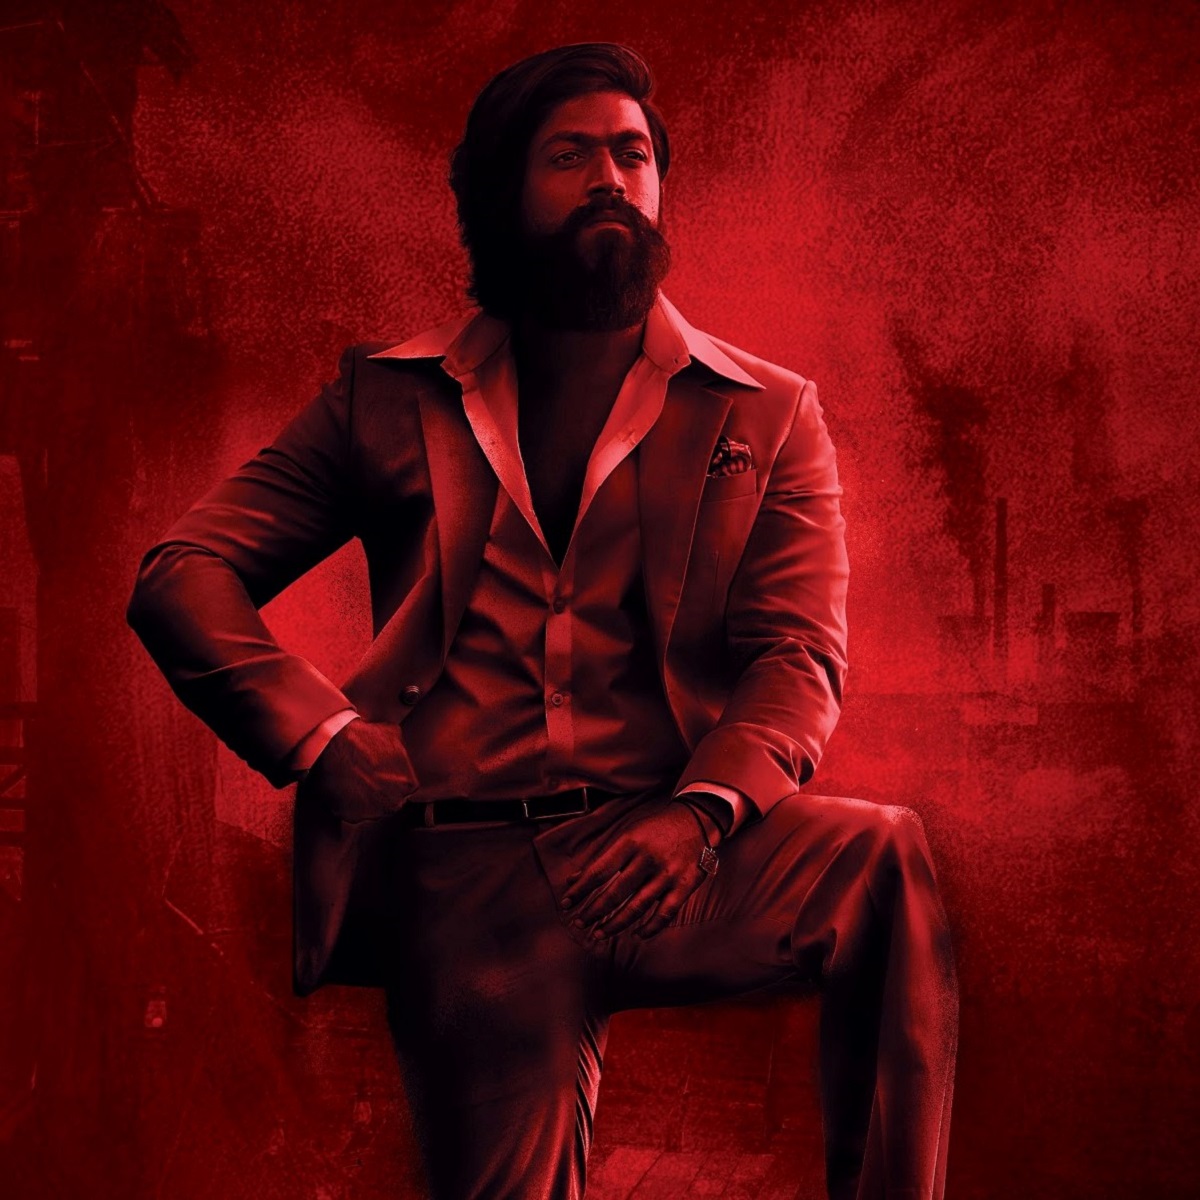 KGF Chapter 2 digs up Rs. 1000 crores at worldwide box office; March towards the same in India